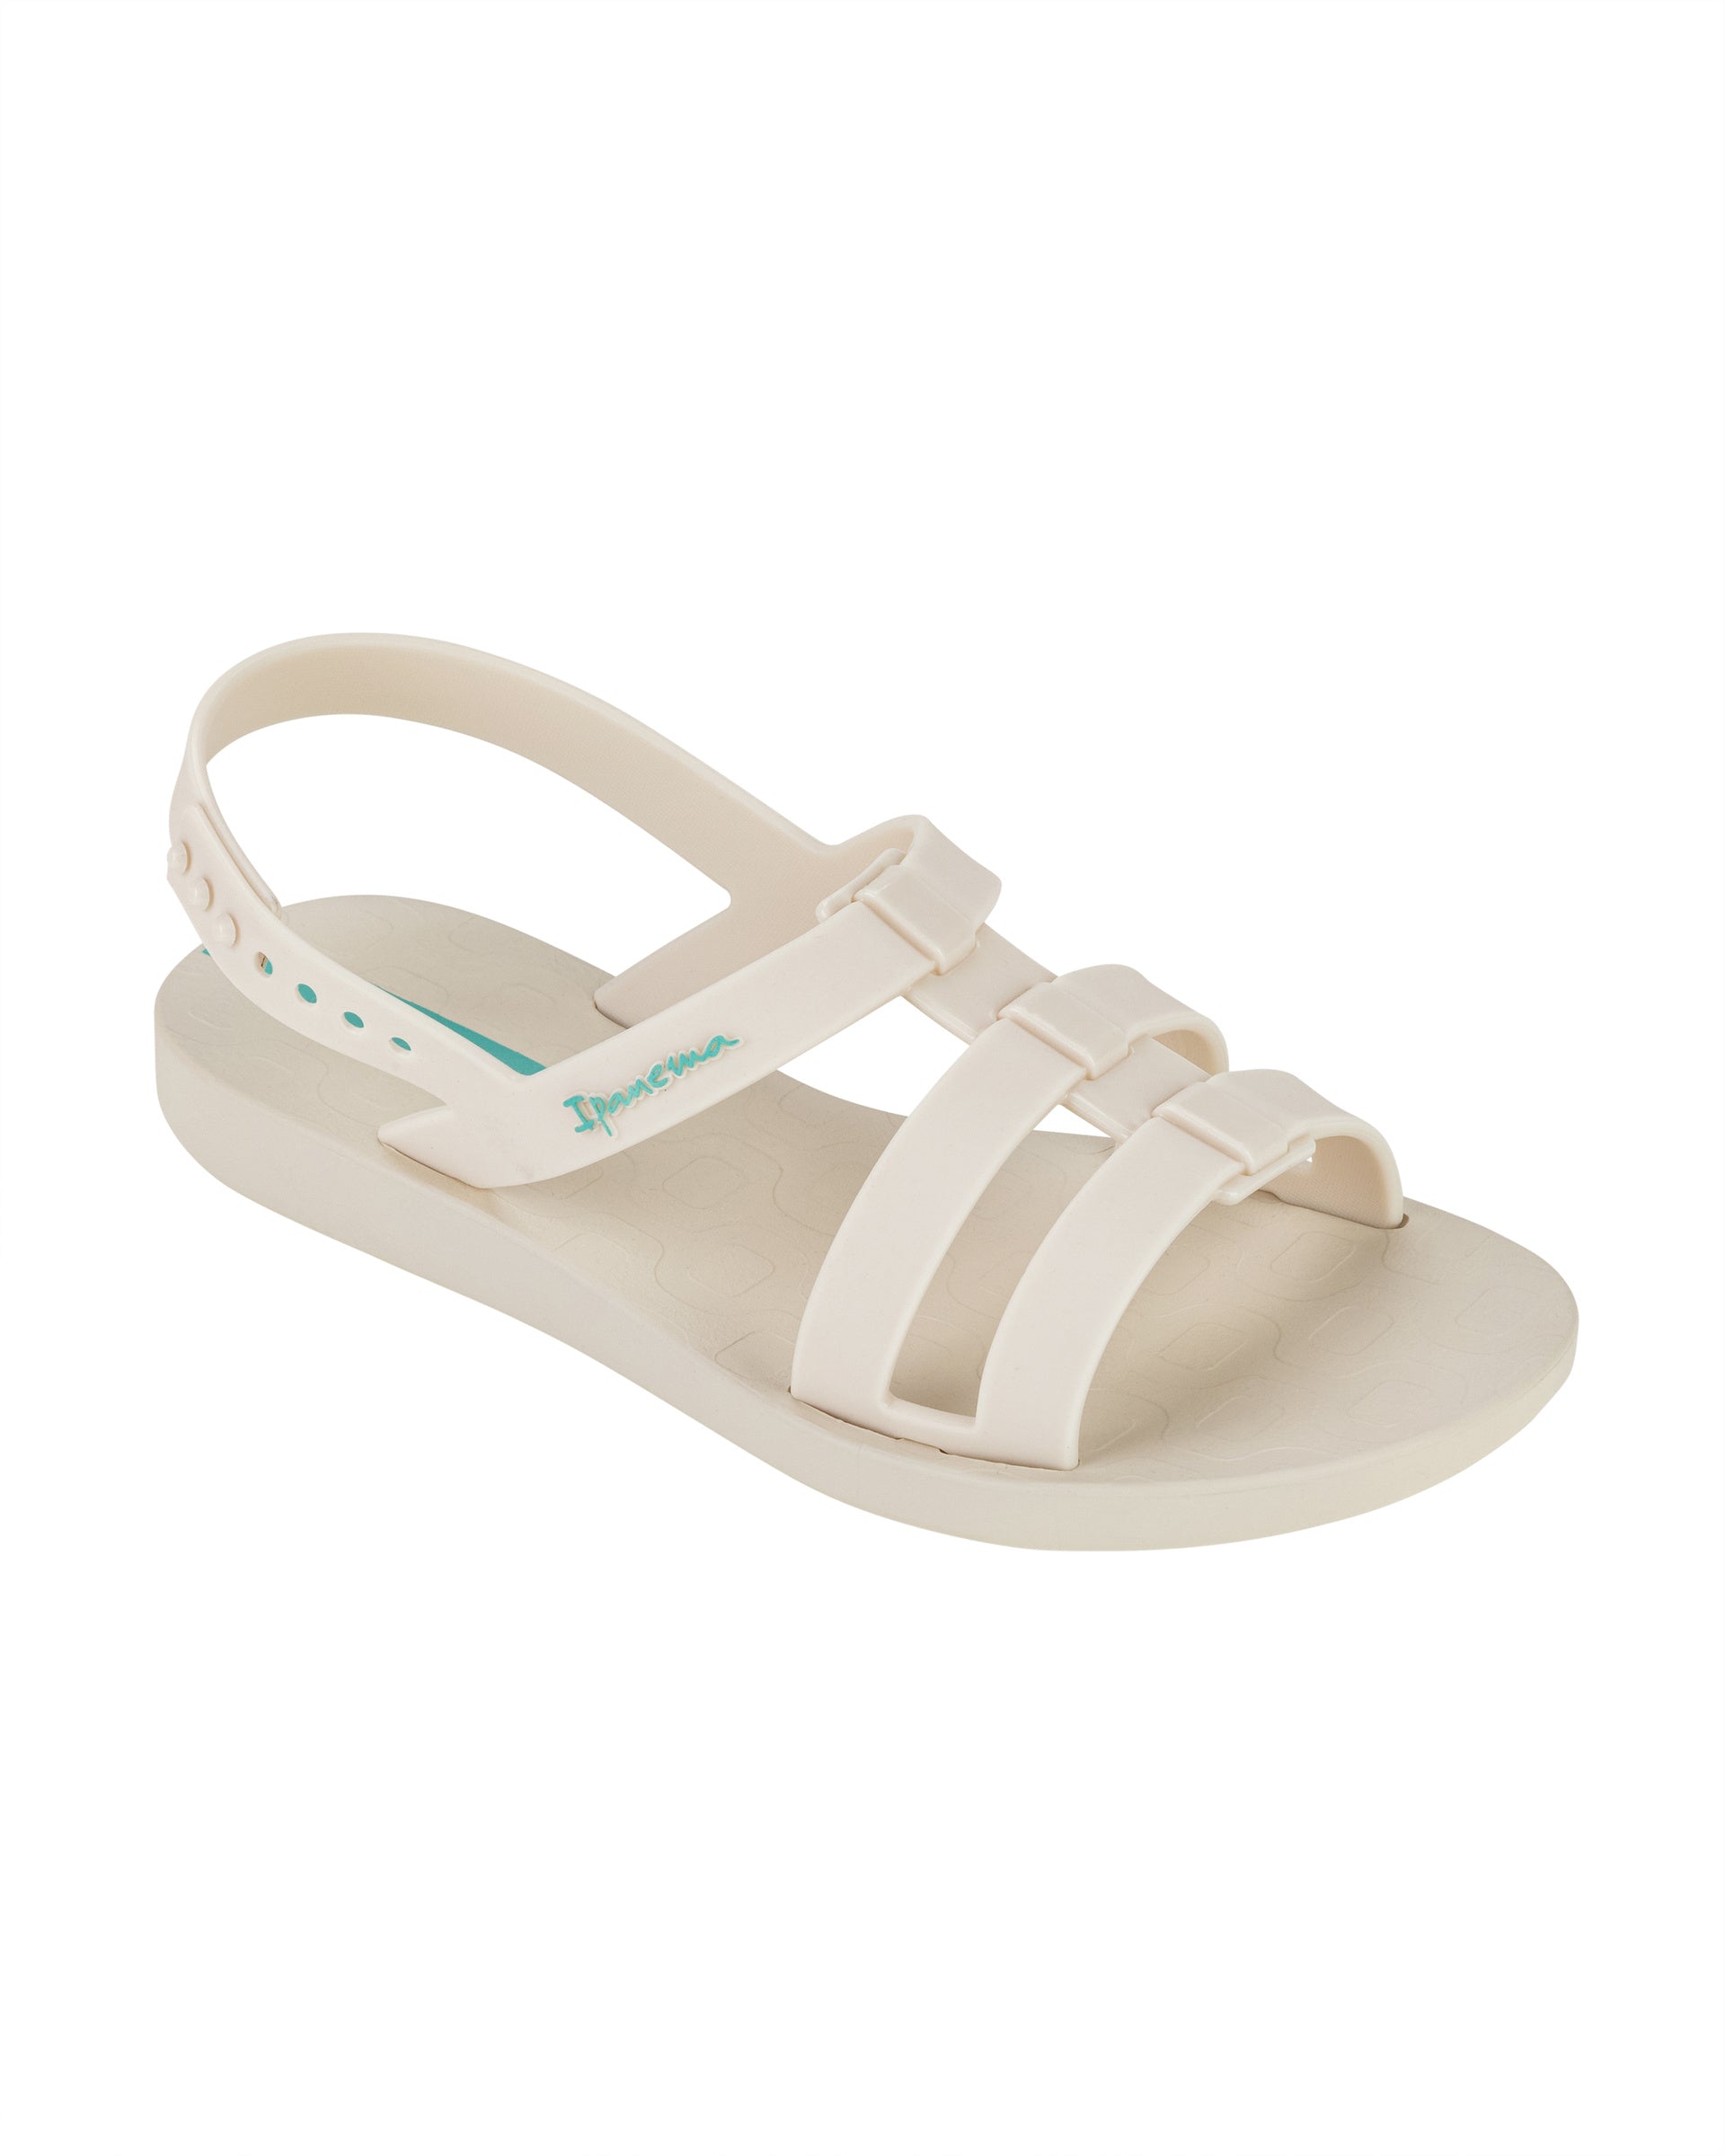 Angled view of a beige Ipanema Class Go women's sandal.